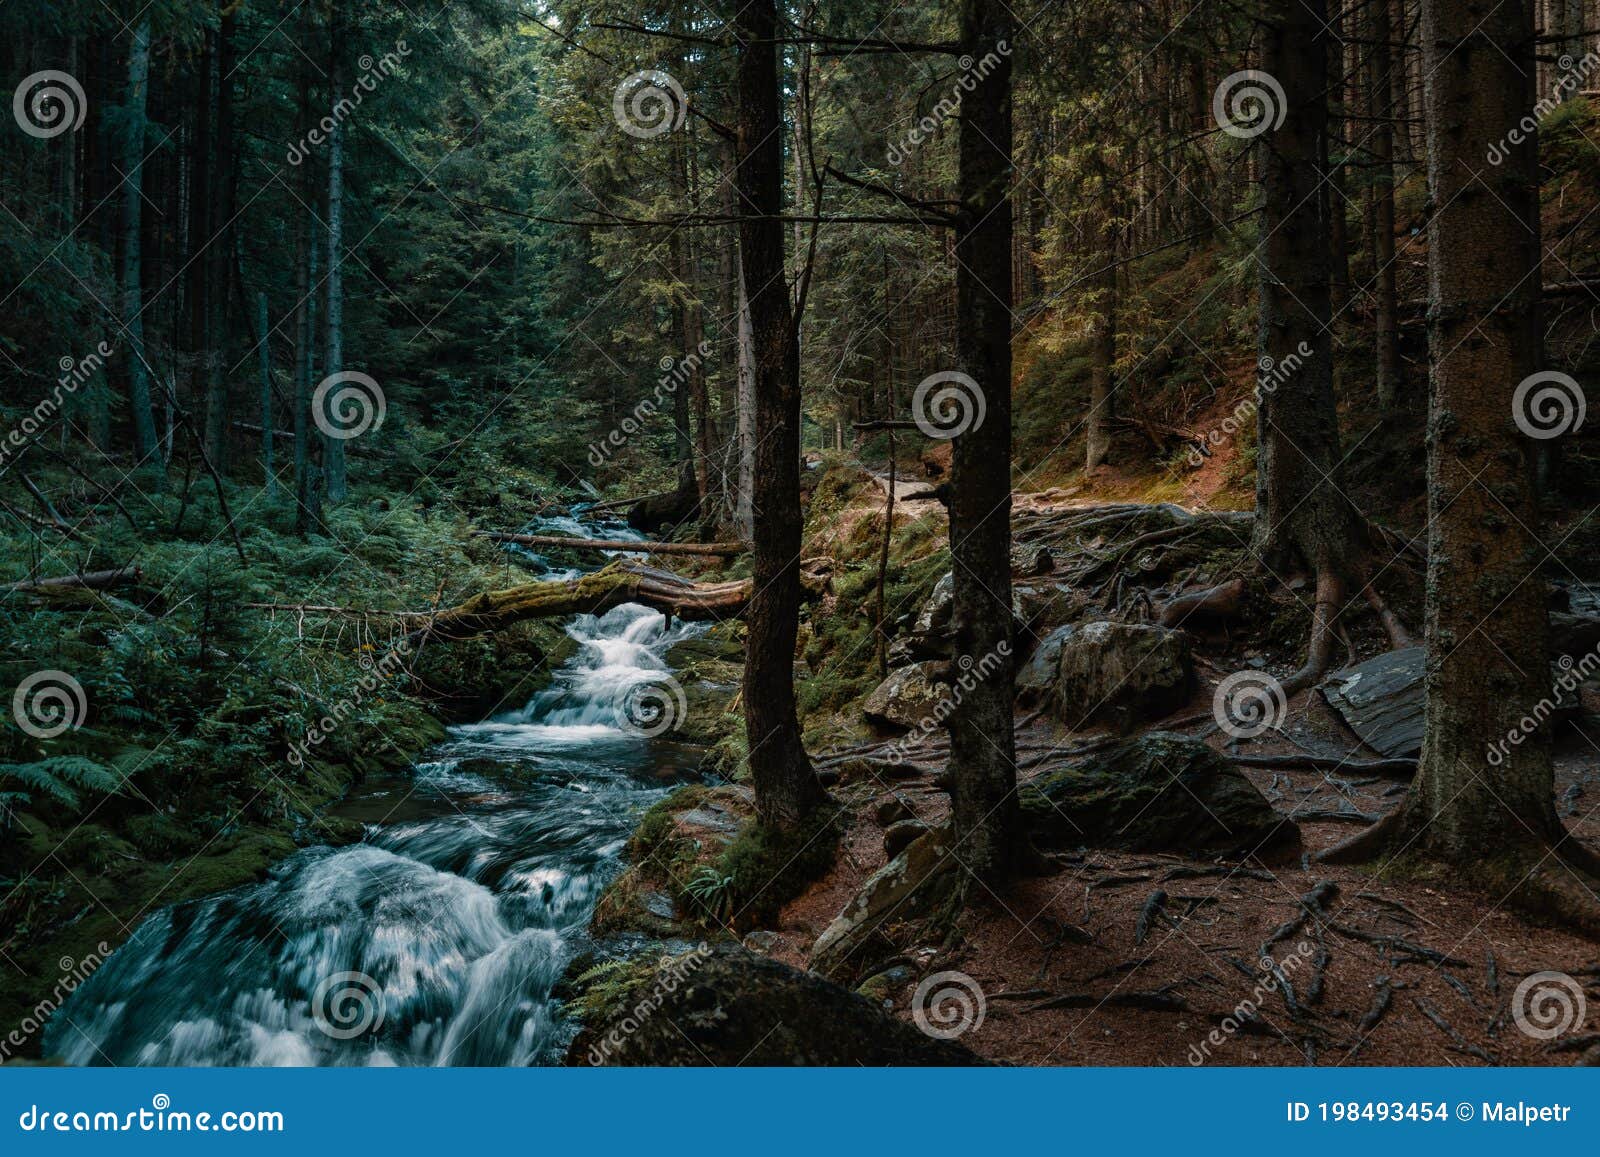 cold moutain forest wilderness with wild stream in evenning light